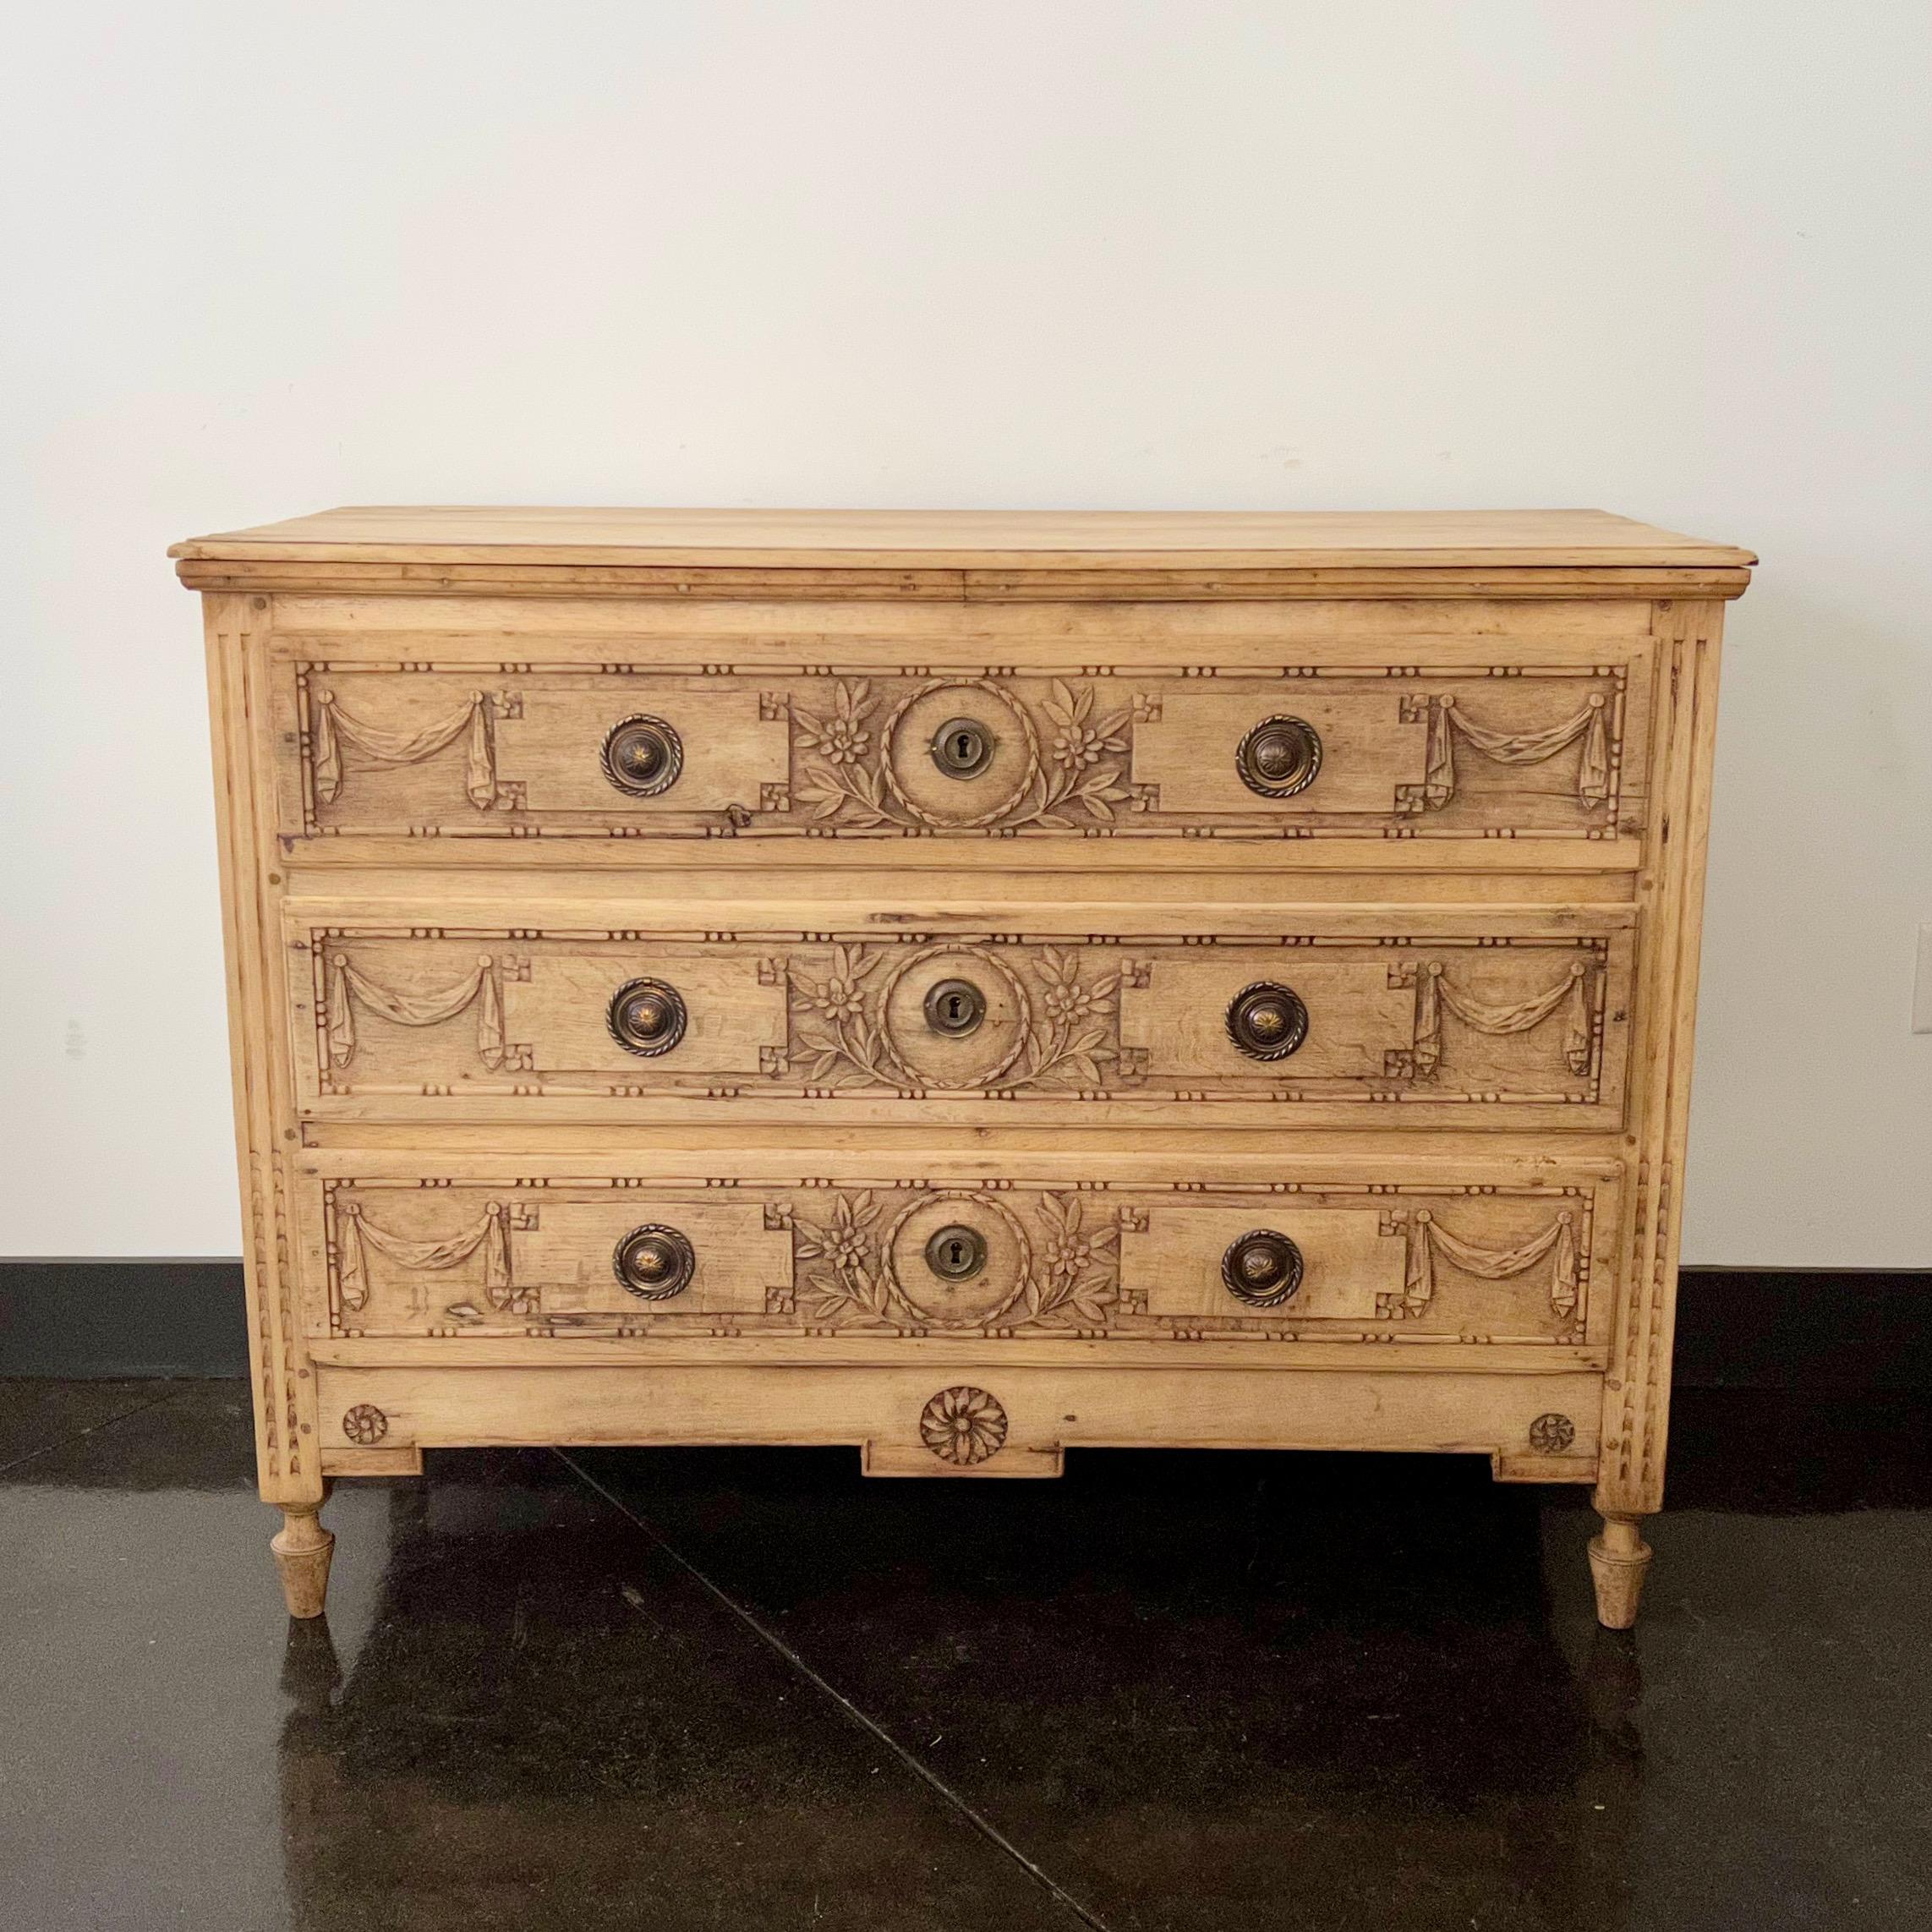 An exquisite 18th century Louis XVI period commode in bleached oak with richly Liege carved drawer fronts and paneled sides.
Late 18th century from Liege, Belgium.